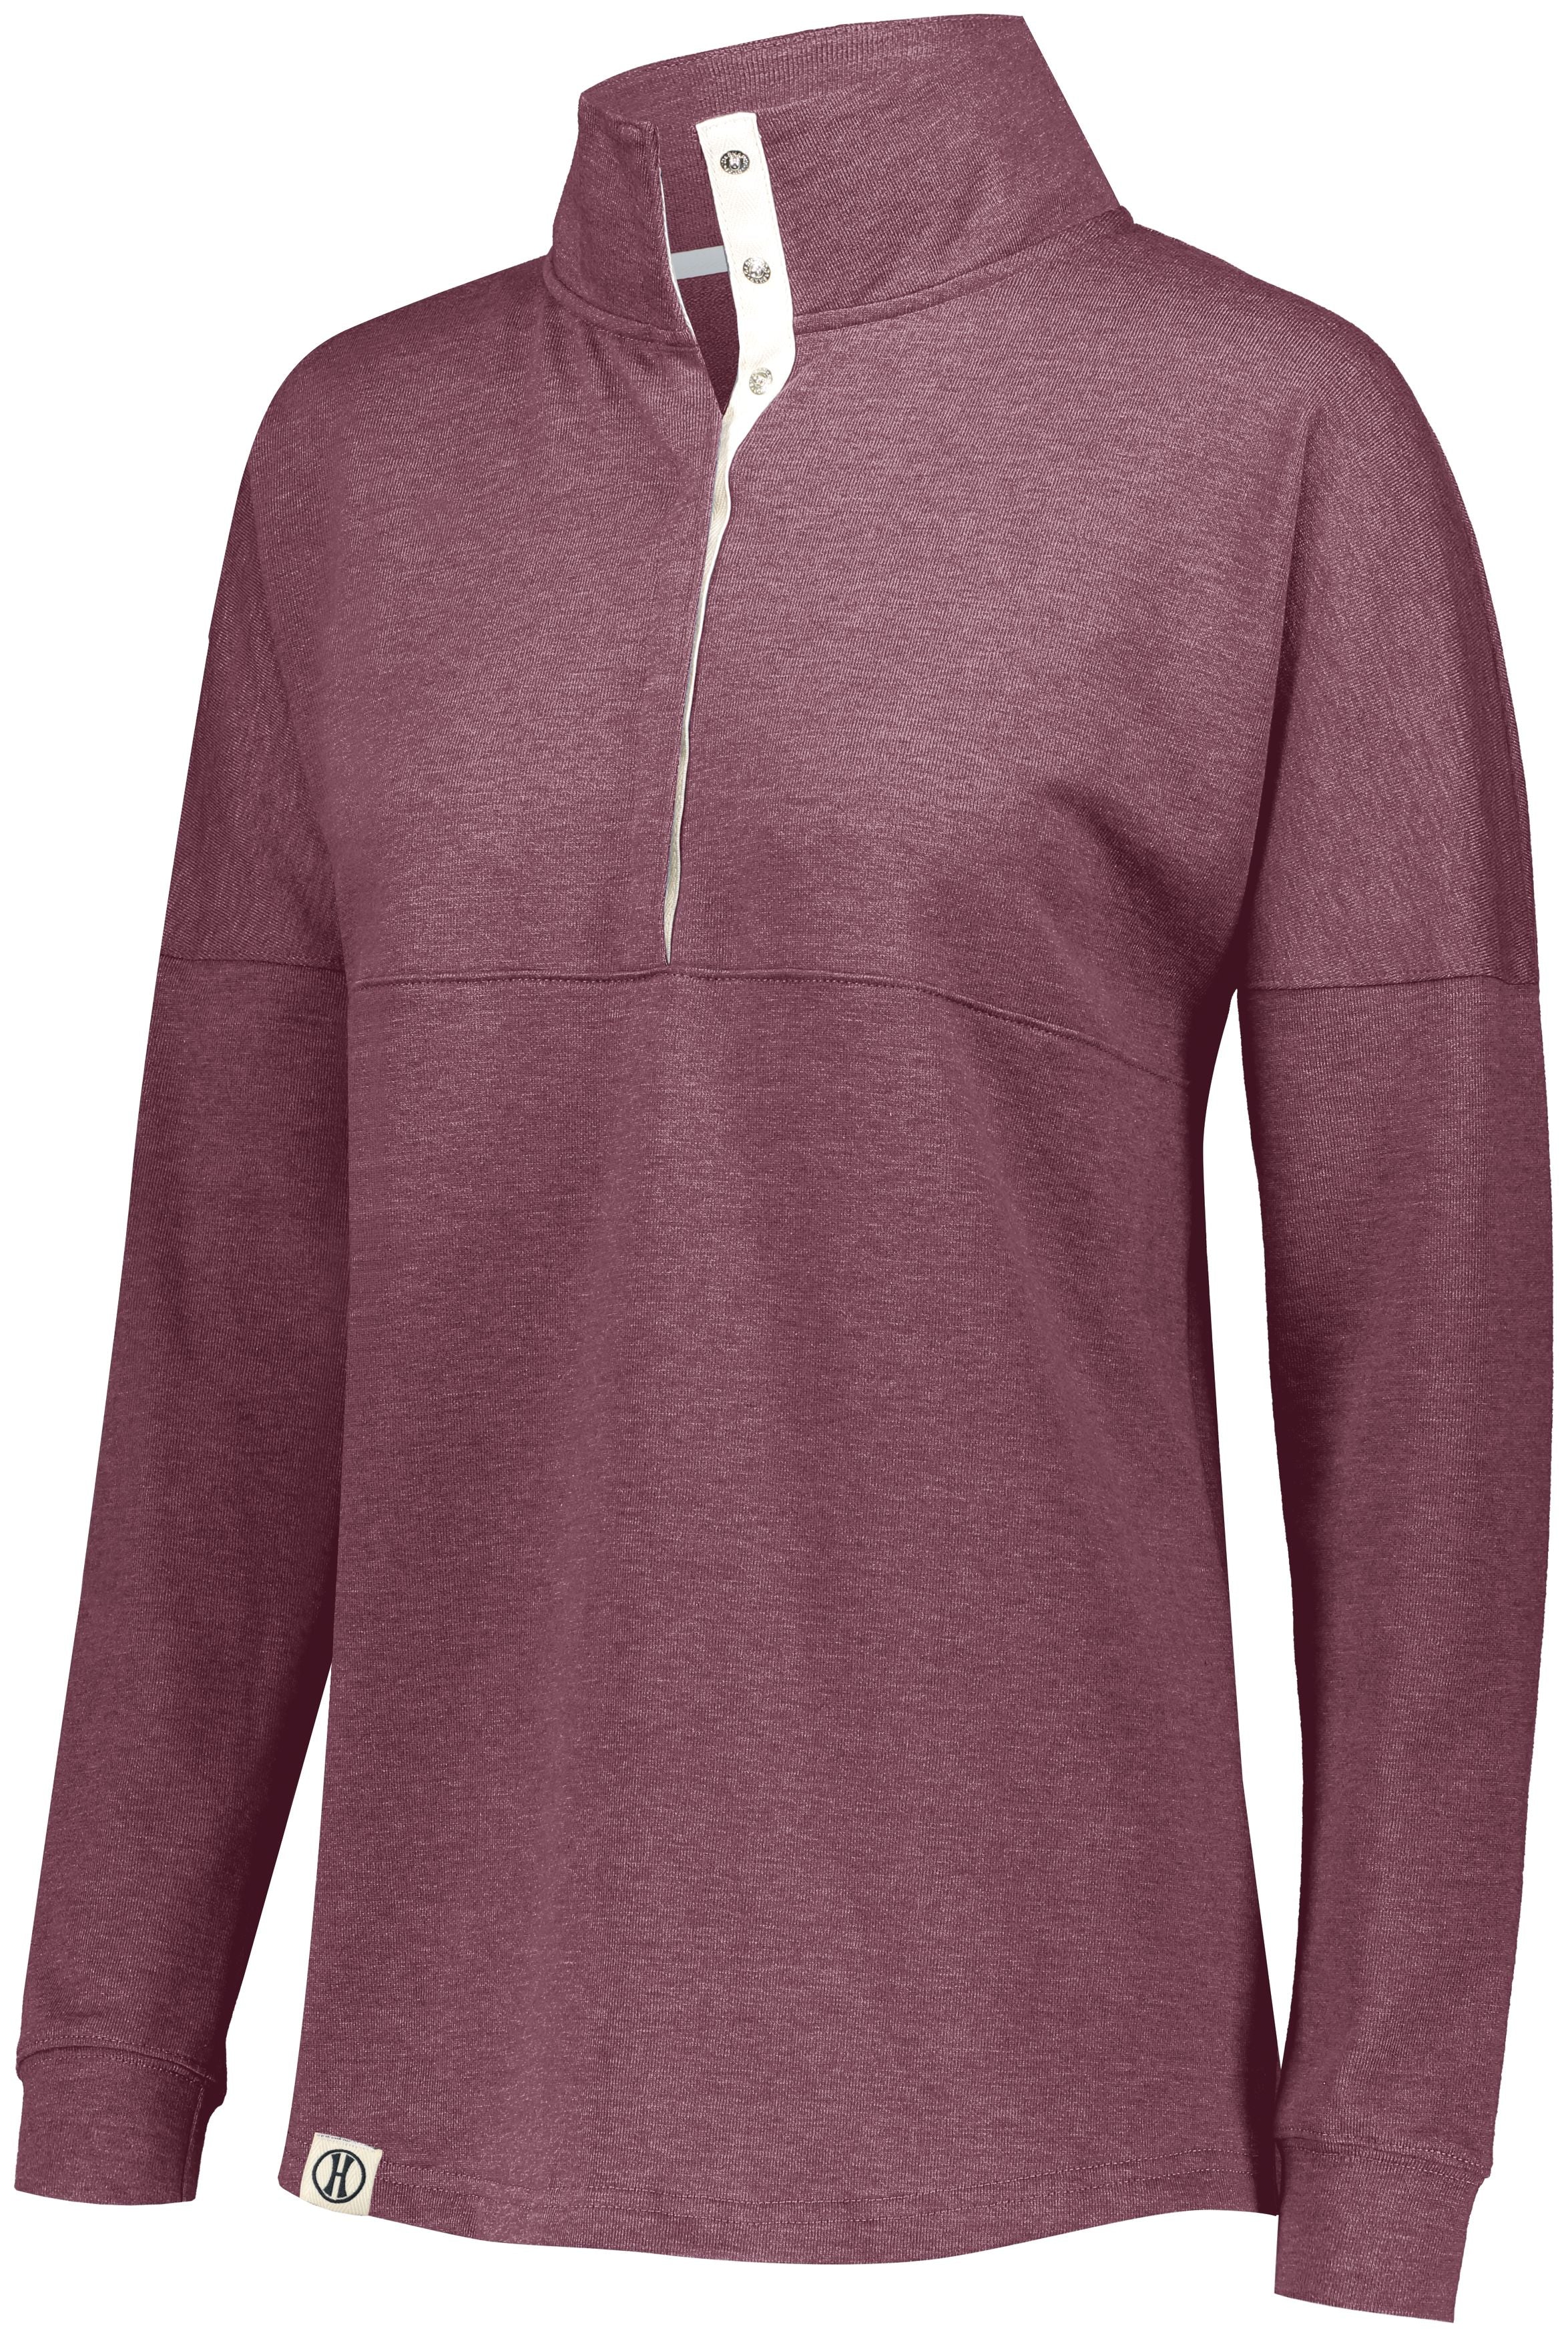 Holloway Ladies Sophomore Pullover in Maroon Heather  -Part of the Ladies, Holloway, Shirts product lines at KanaleyCreations.com